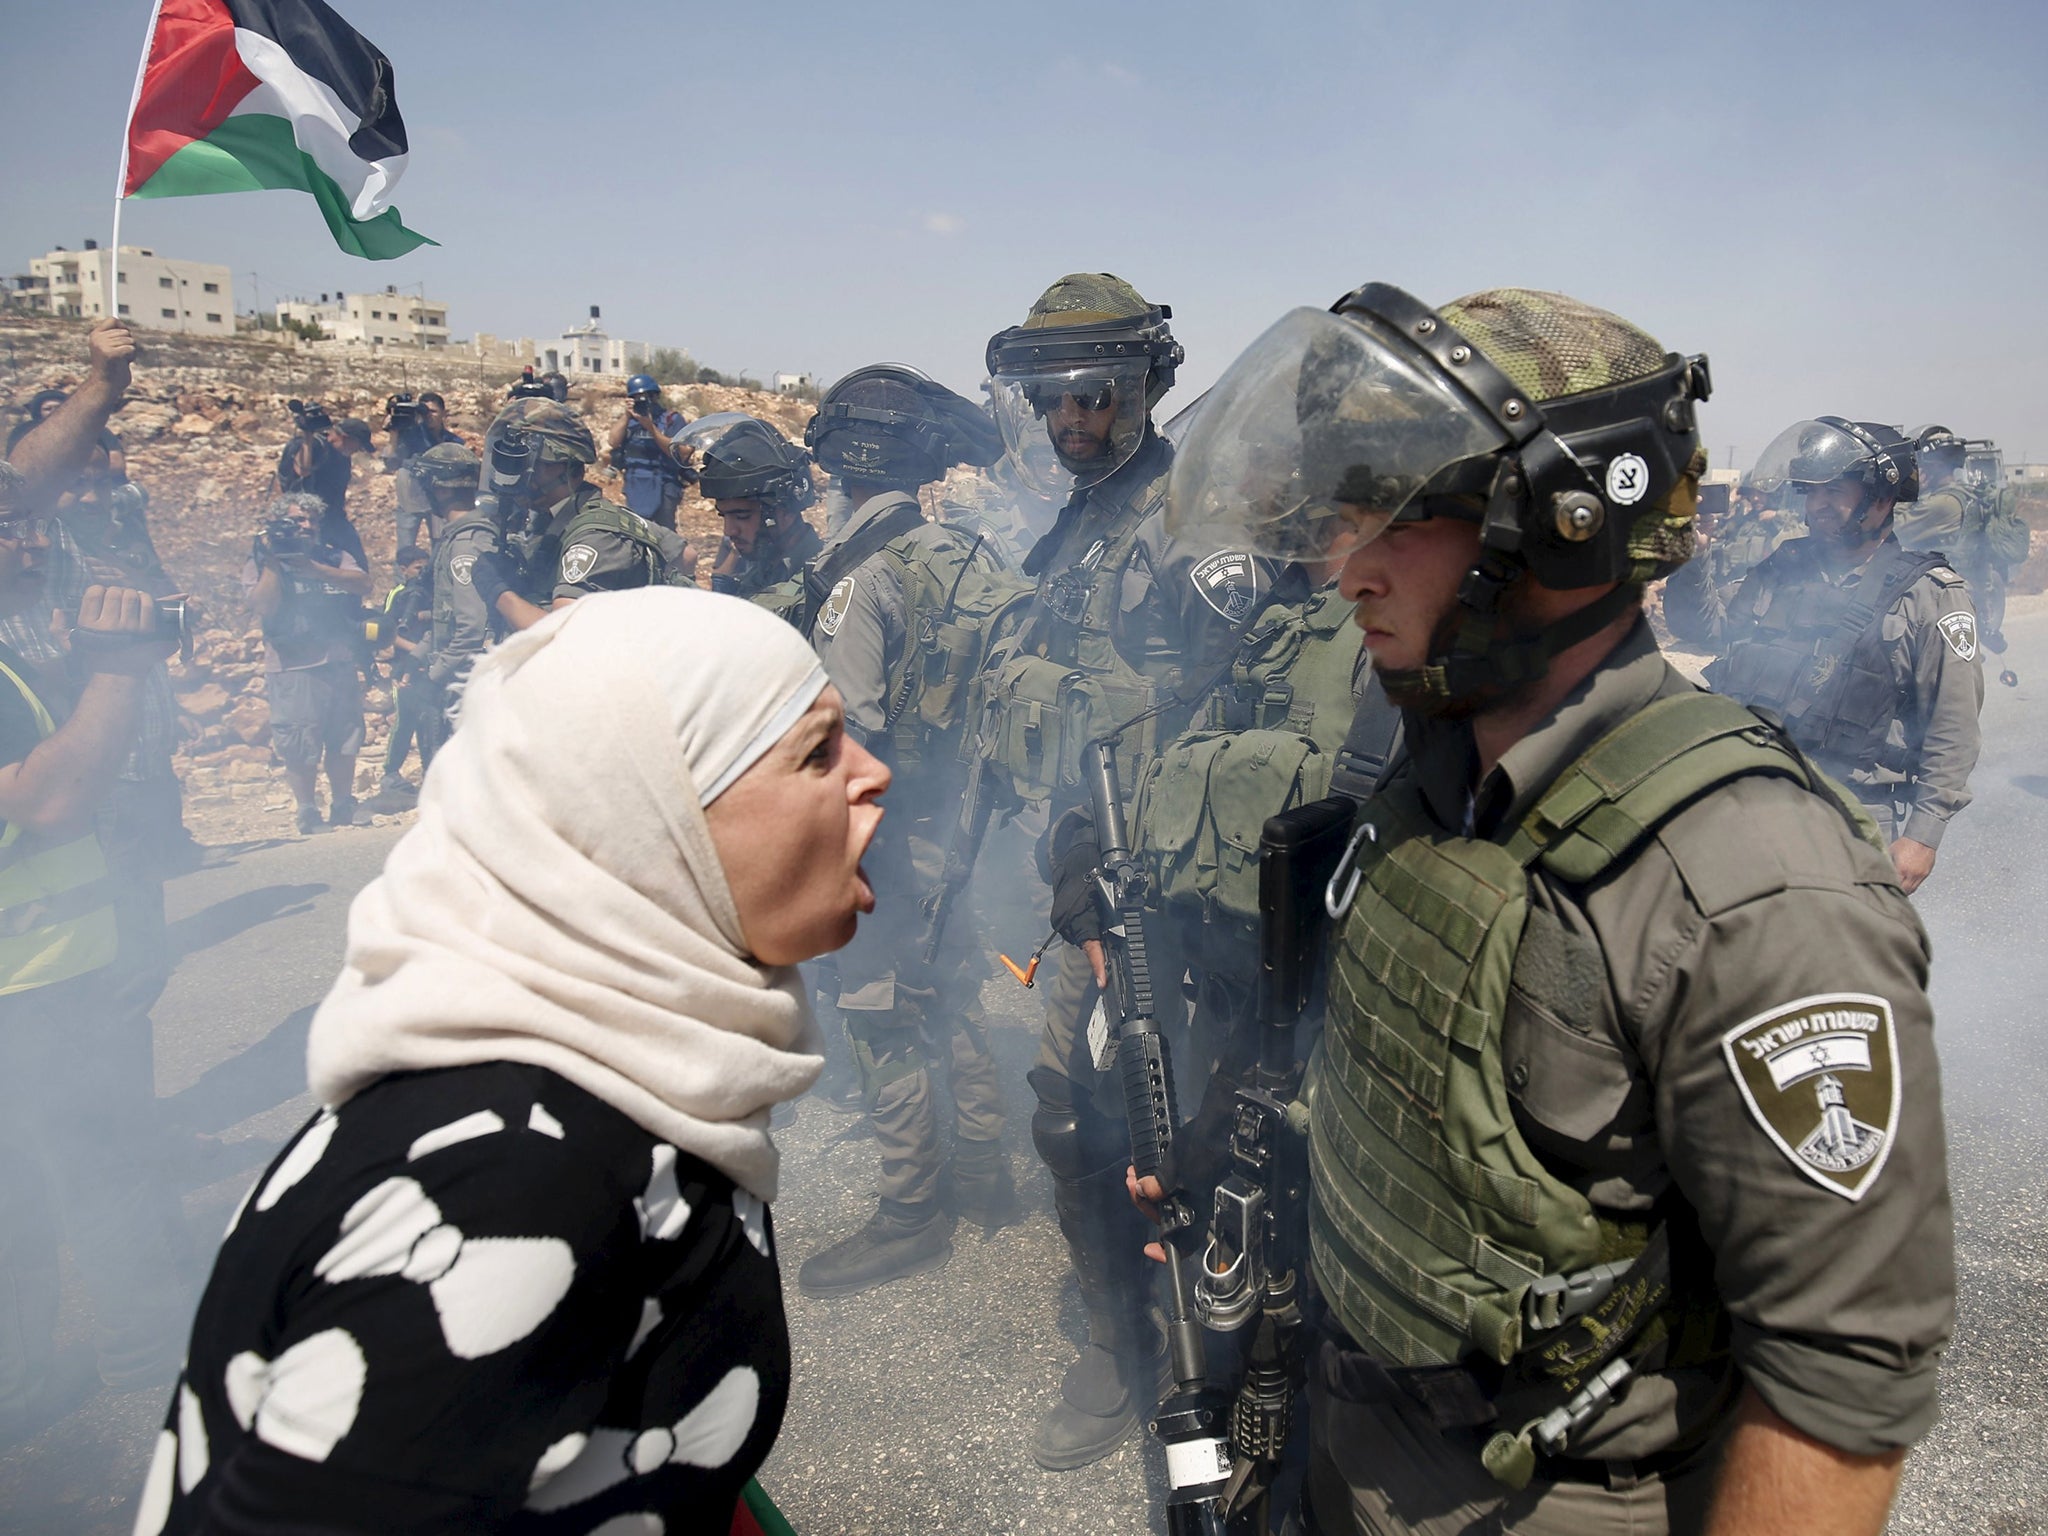 A Palestinian woman argues with an Israeli border policeman during a protest against Jewish settlements in the West Bank village of Nabi Saleh, near Ramallah